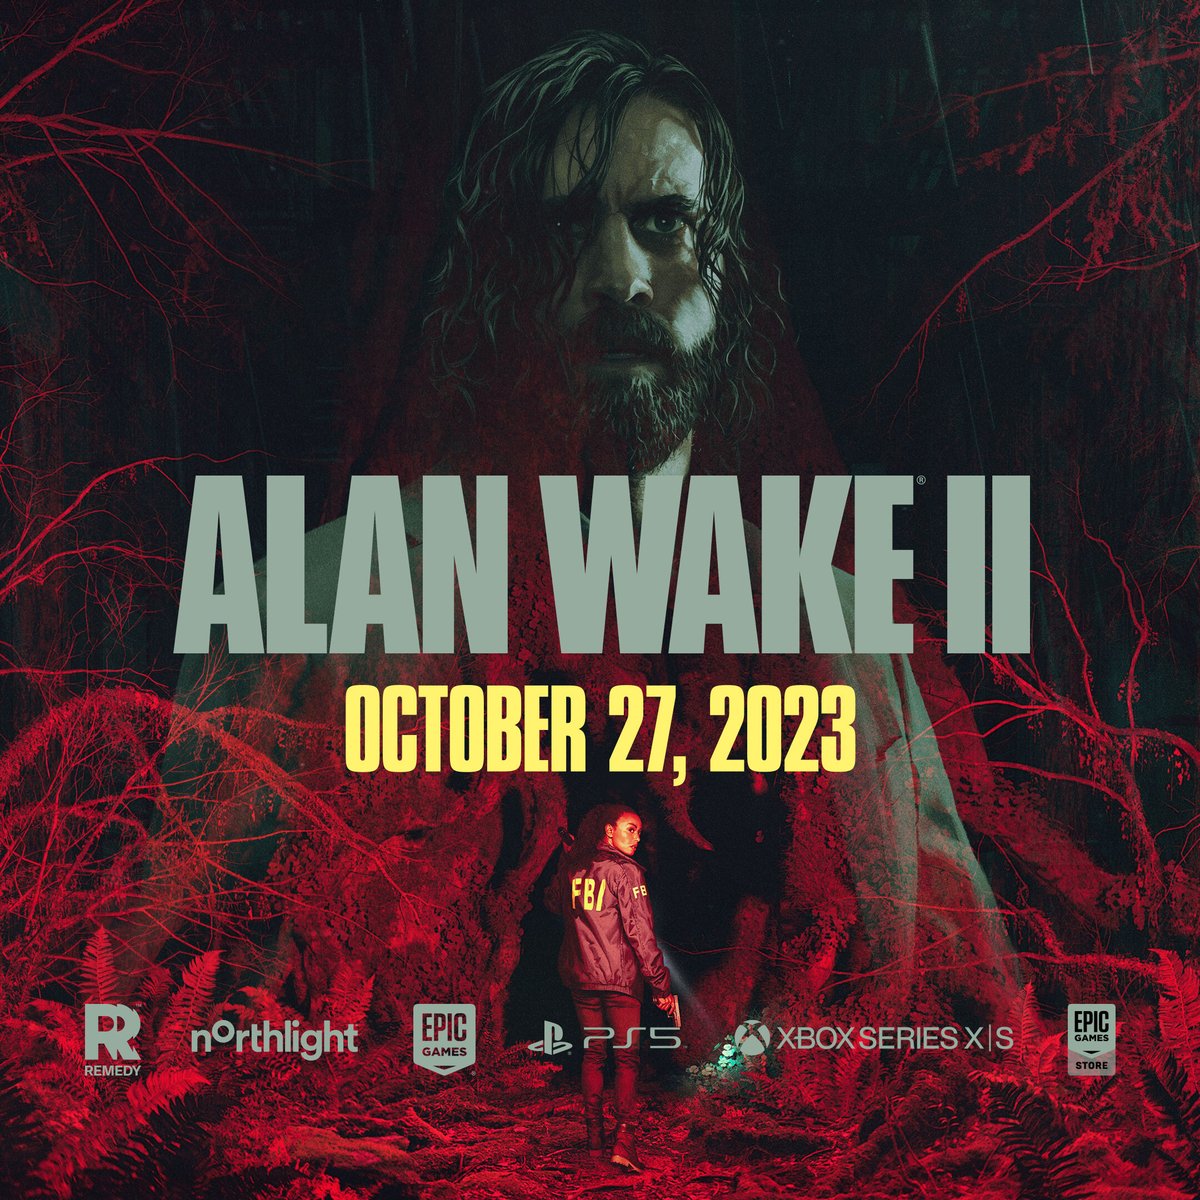 Will Alan Wake 2 be on PS5?